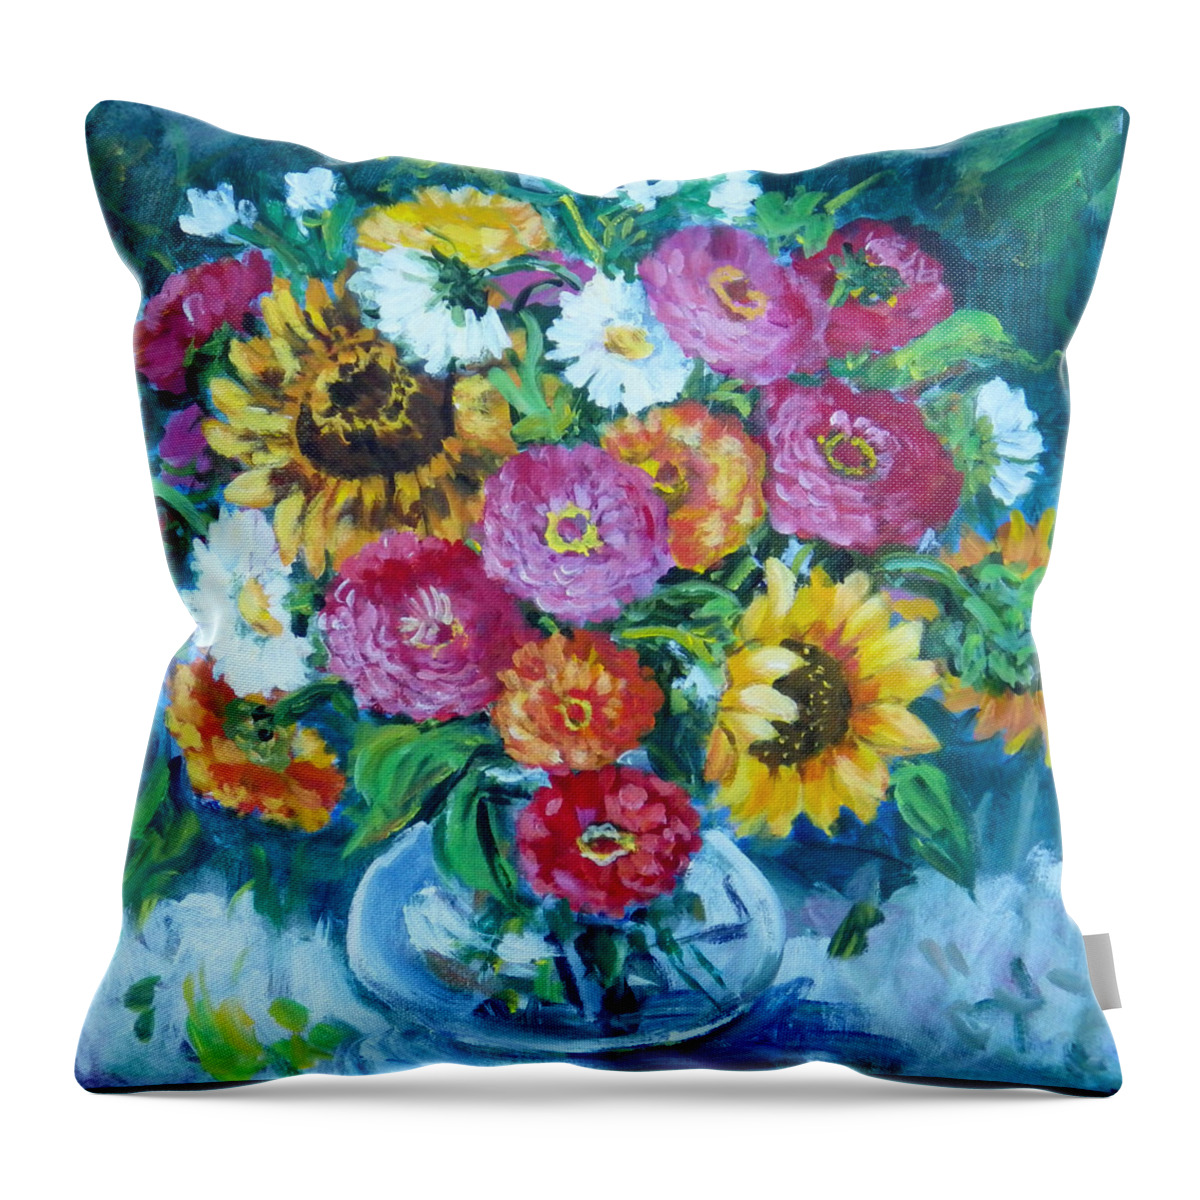 Flowers Throw Pillow featuring the painting Floral Explosion No.1 by Ingrid Dohm